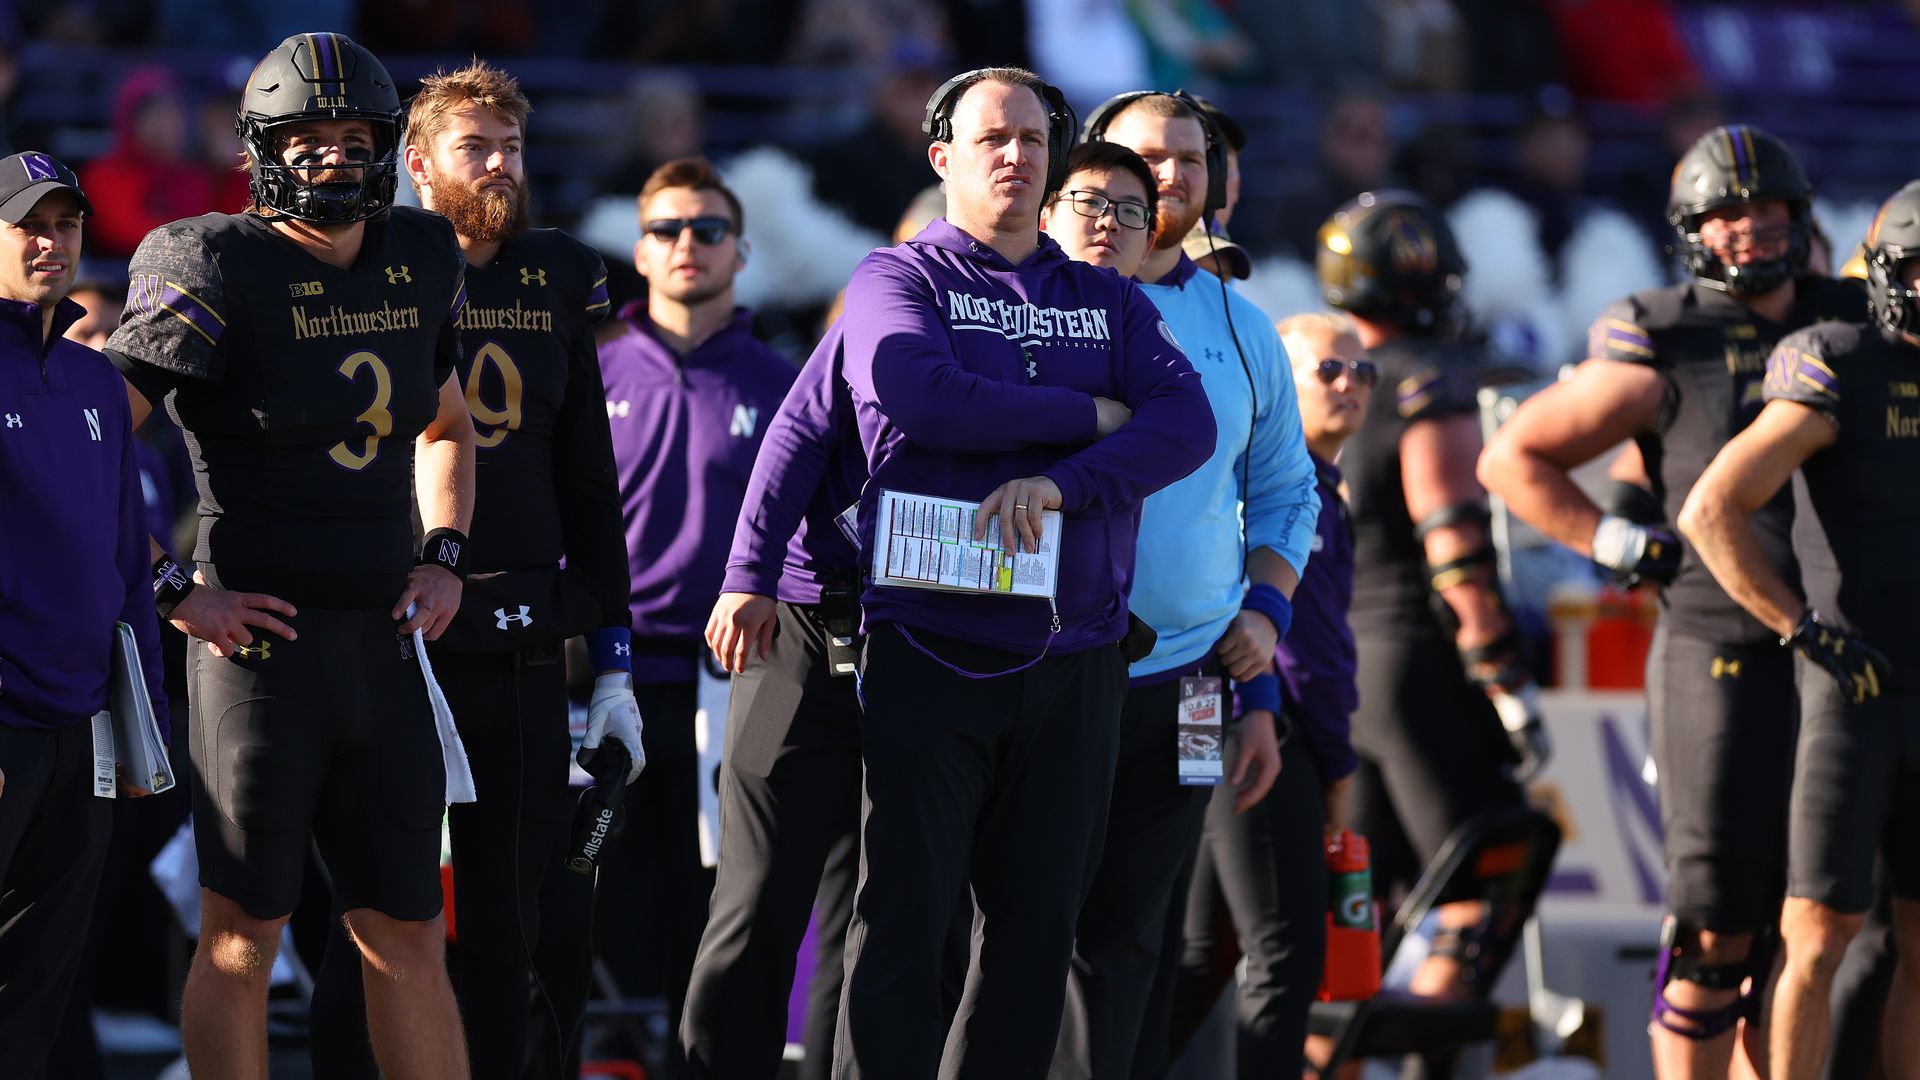 Coach in purple hoodie with arms crossed, surrounded by football players in black uniforms and helmets.